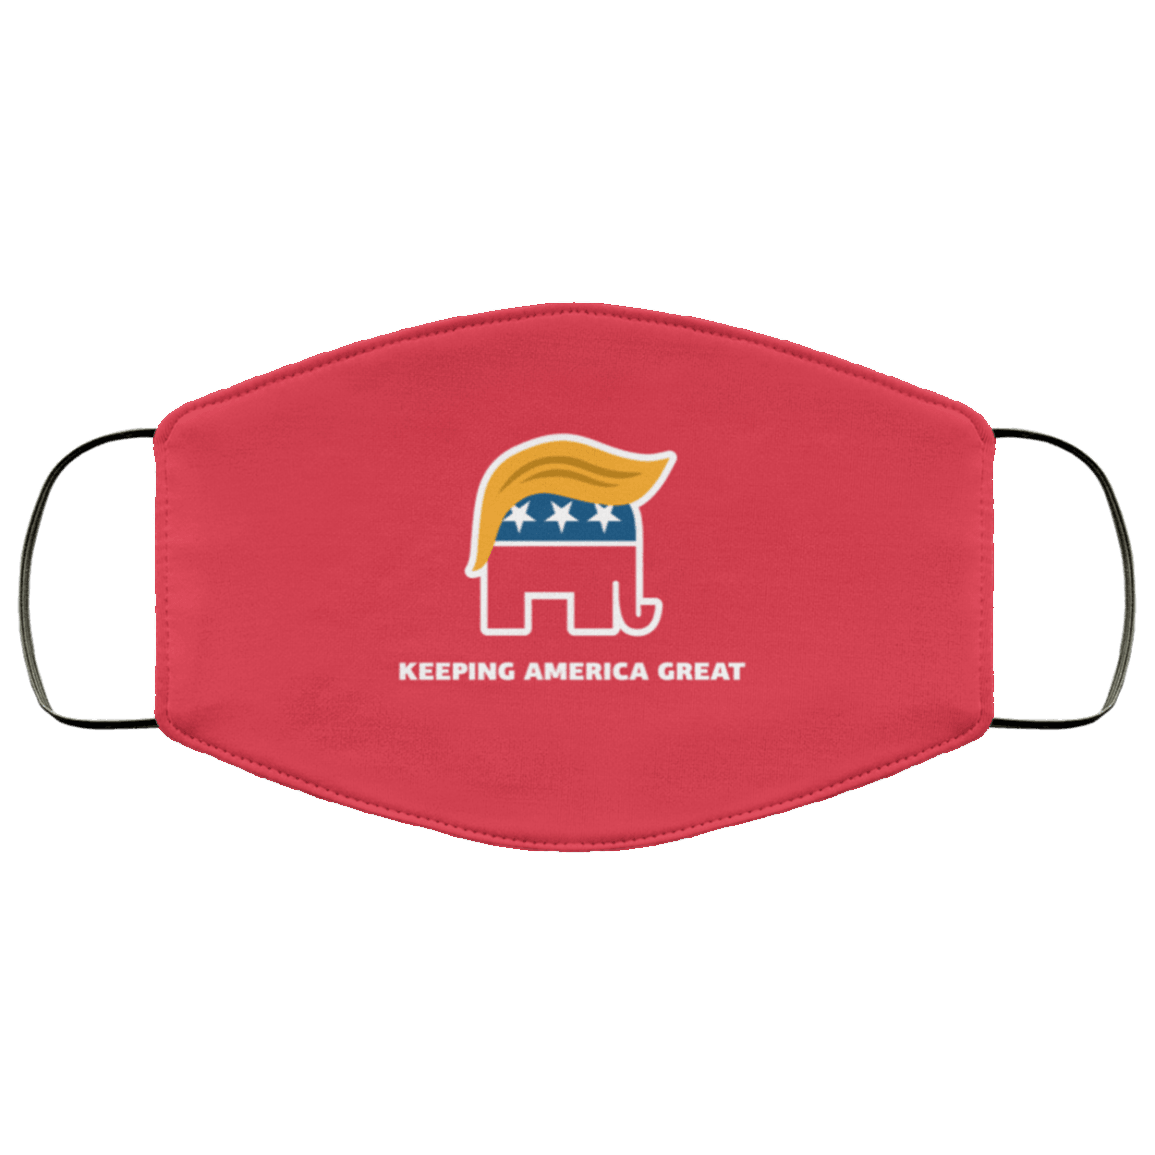 Designs by MyUtopia Shout Out:Trump Elephant Keeping America Great Adult Fabric Face Mask with Elastic Ear Loops,3 Layer Fabric Face Mask / Red / Adult,Fabric Face Mask